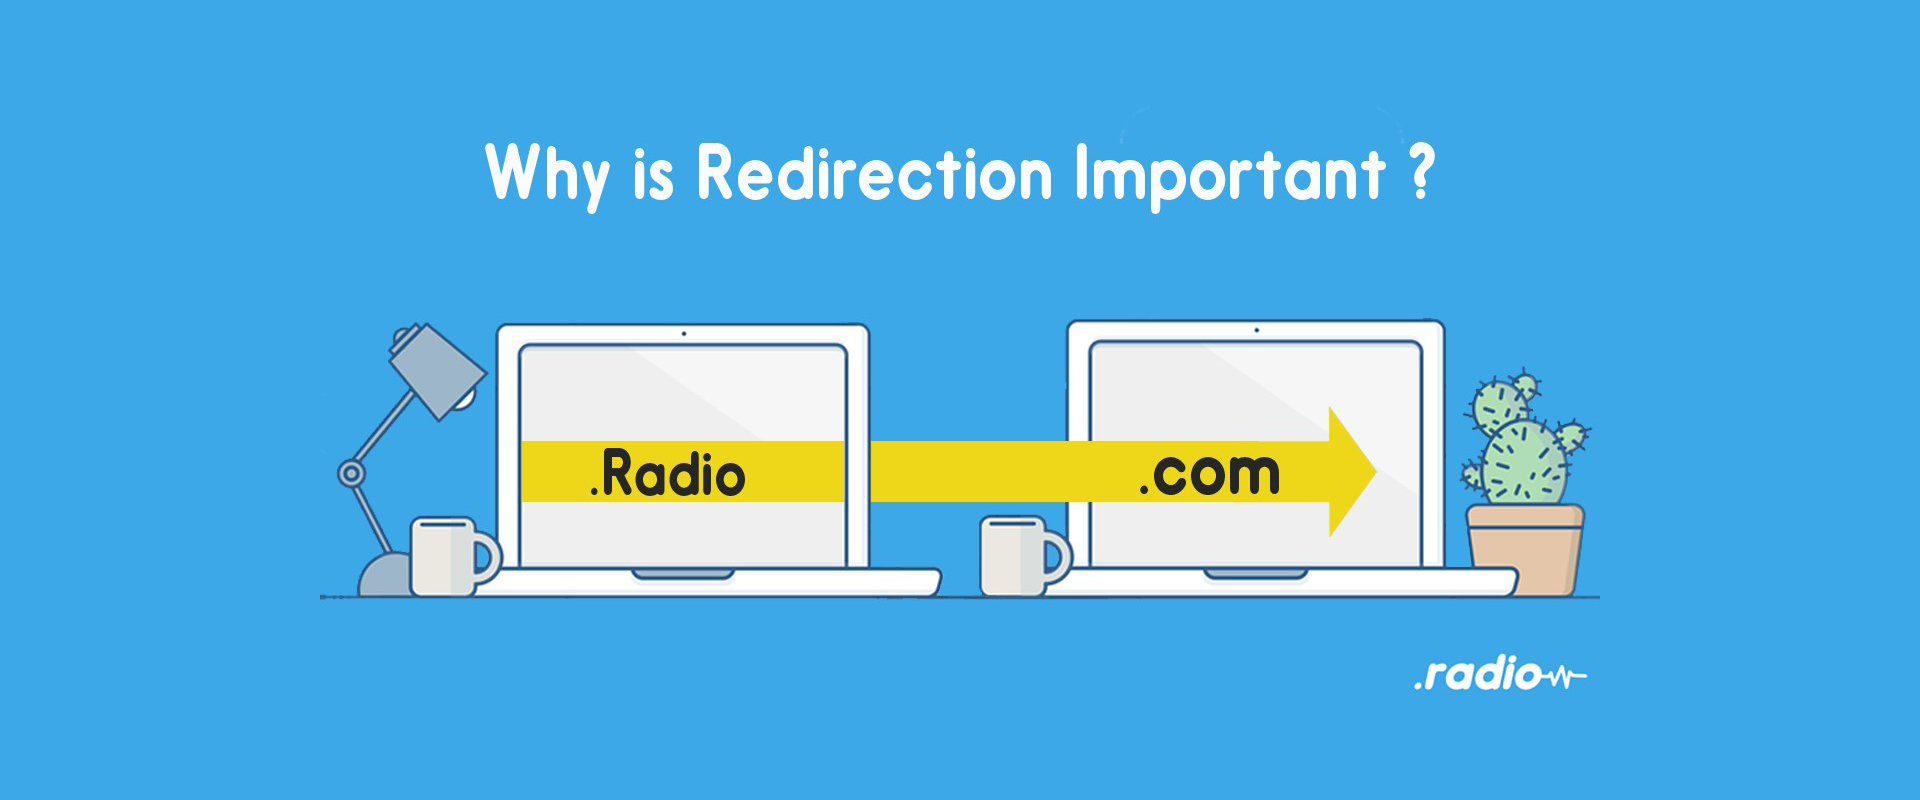 Why is redirection so important